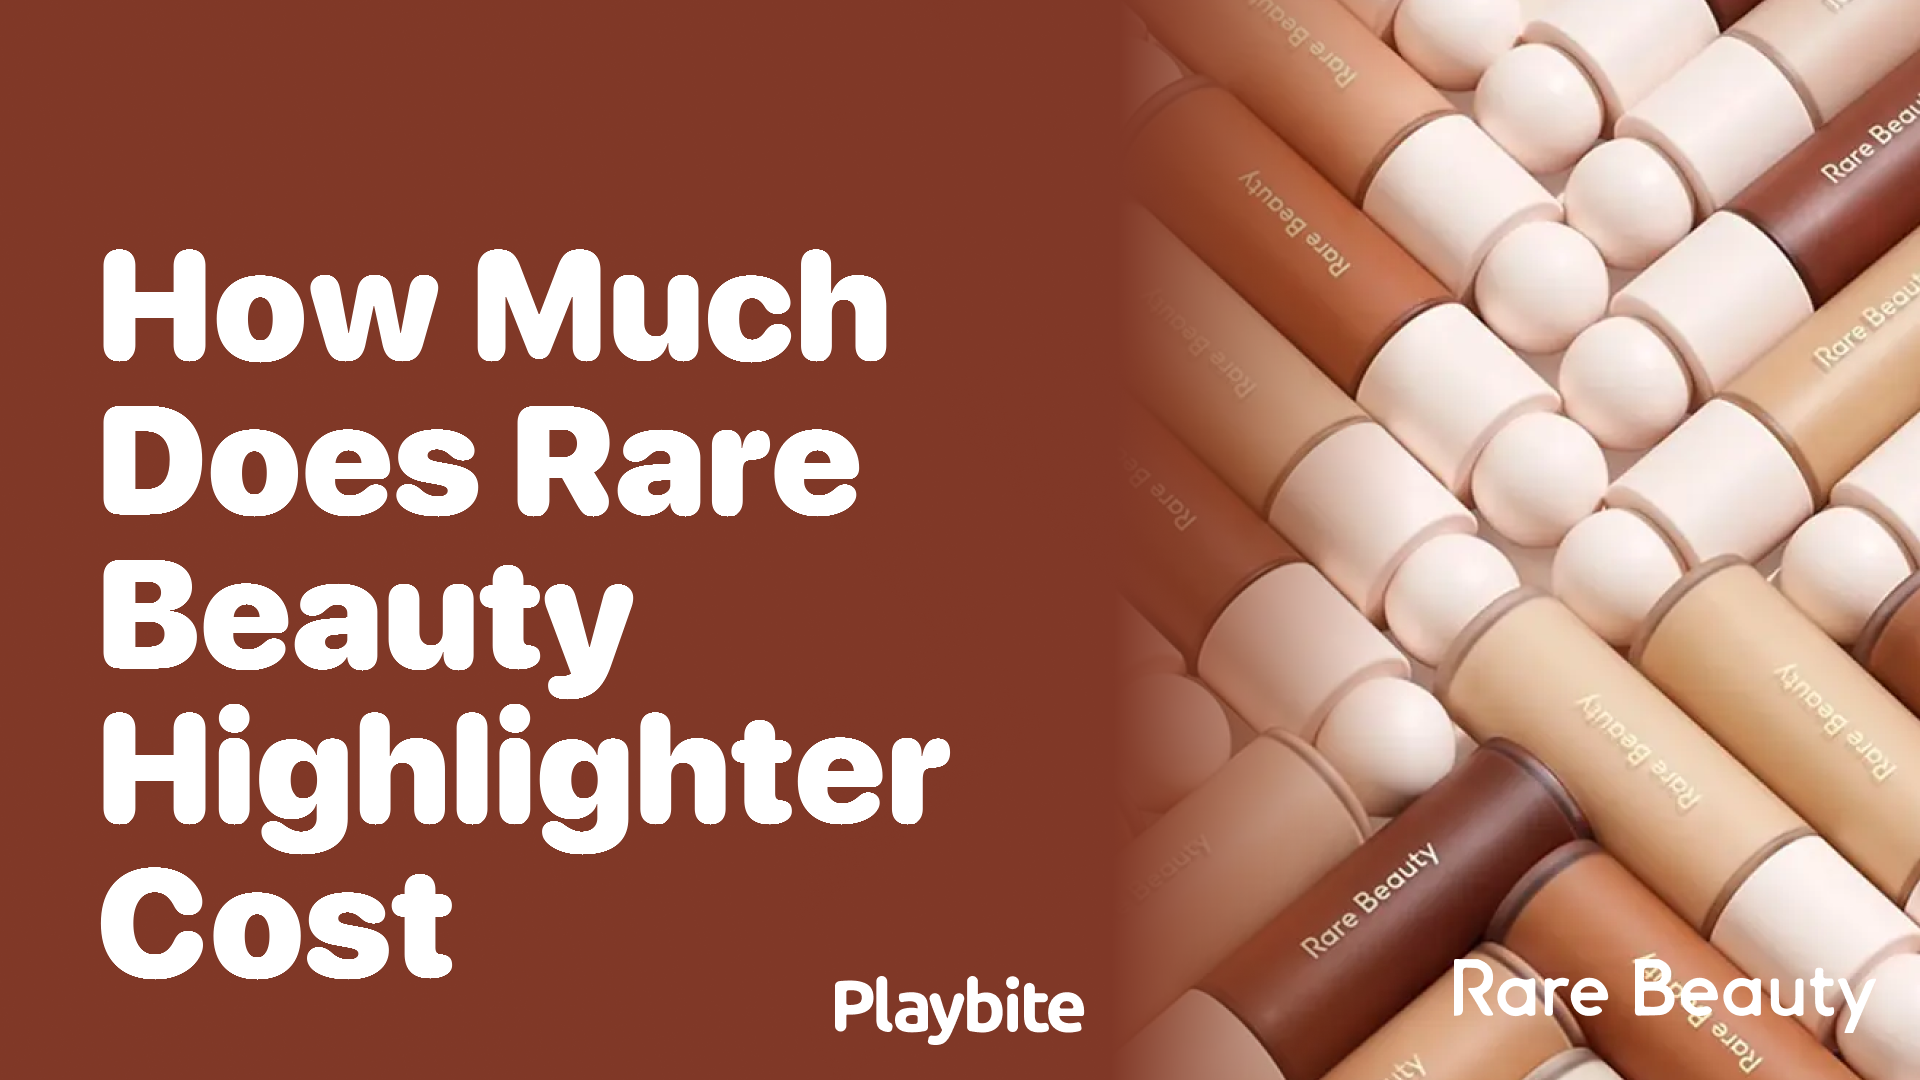 How Much Does Rare Beauty Highlighter Cost?